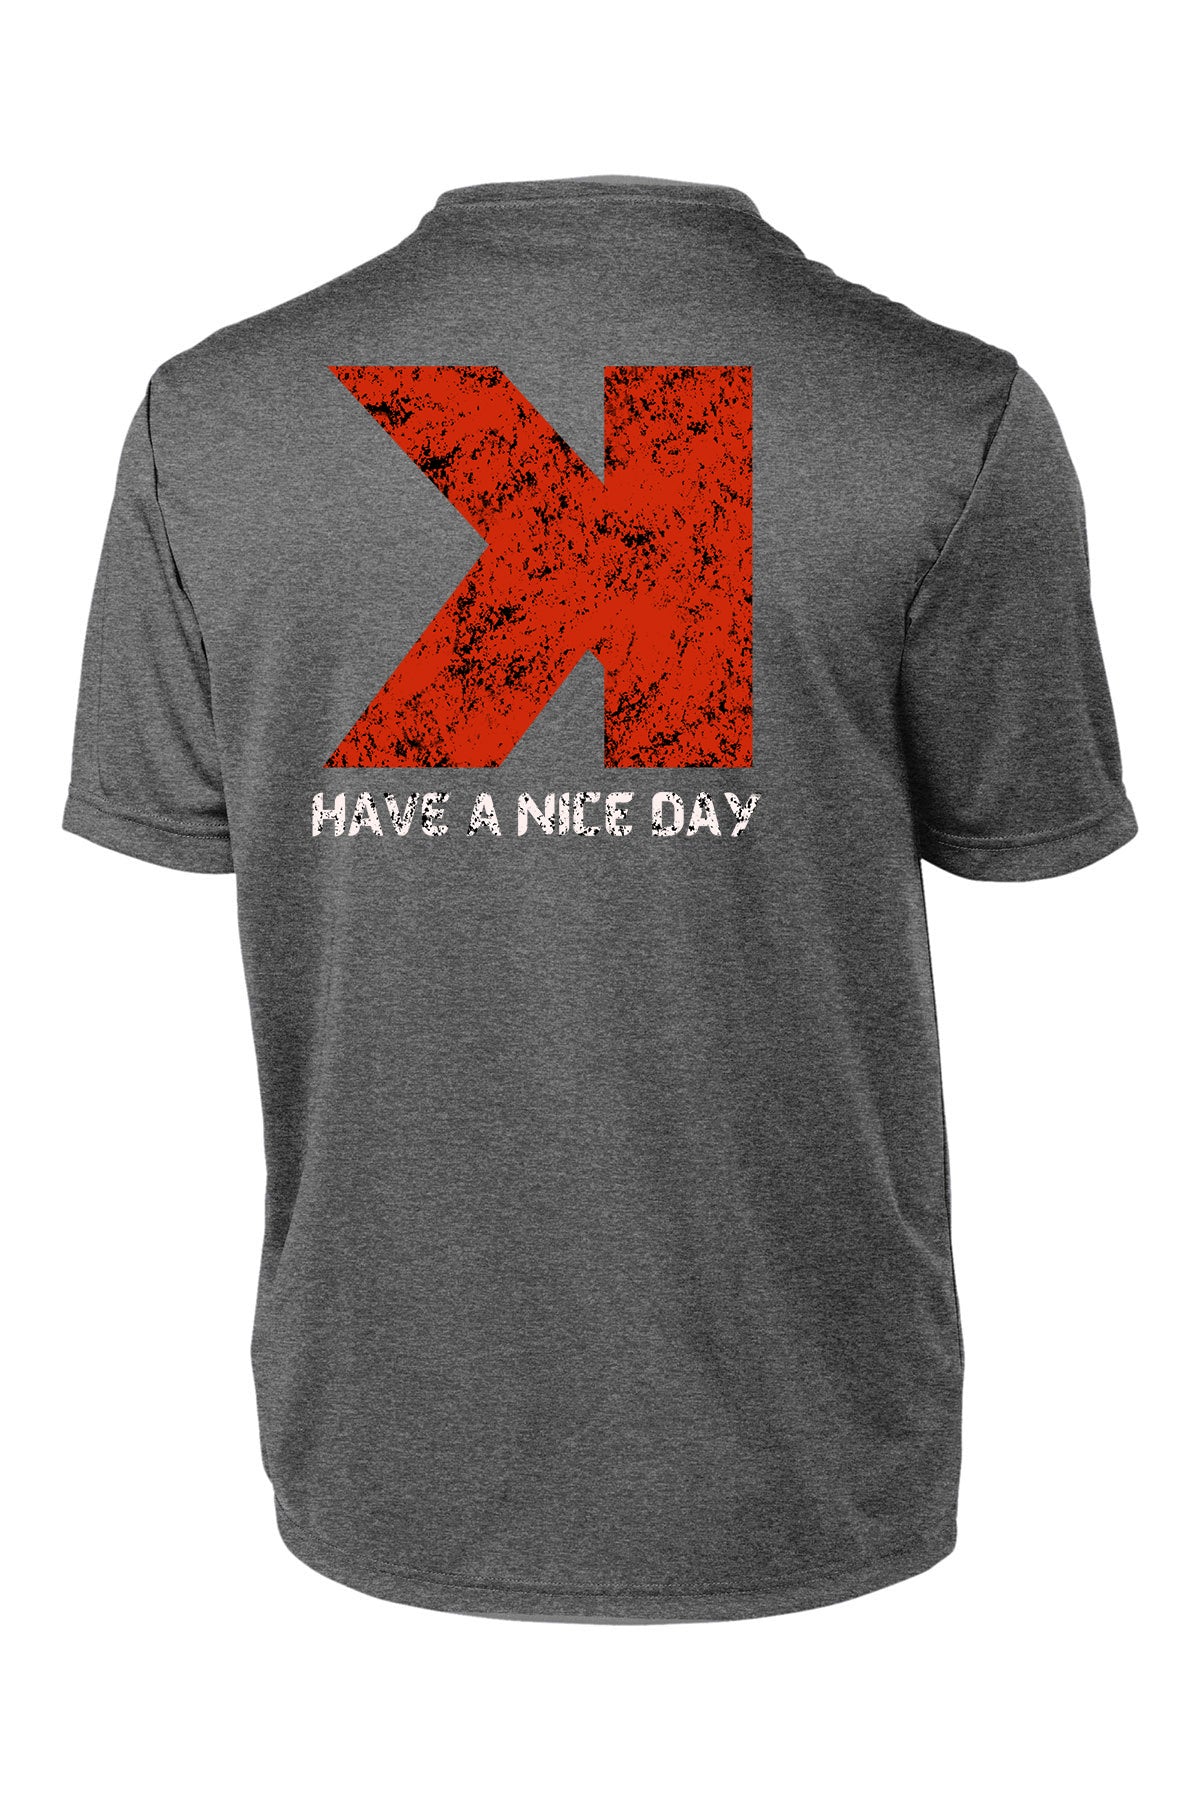 Have A Nice Day - Dri Fit Tee